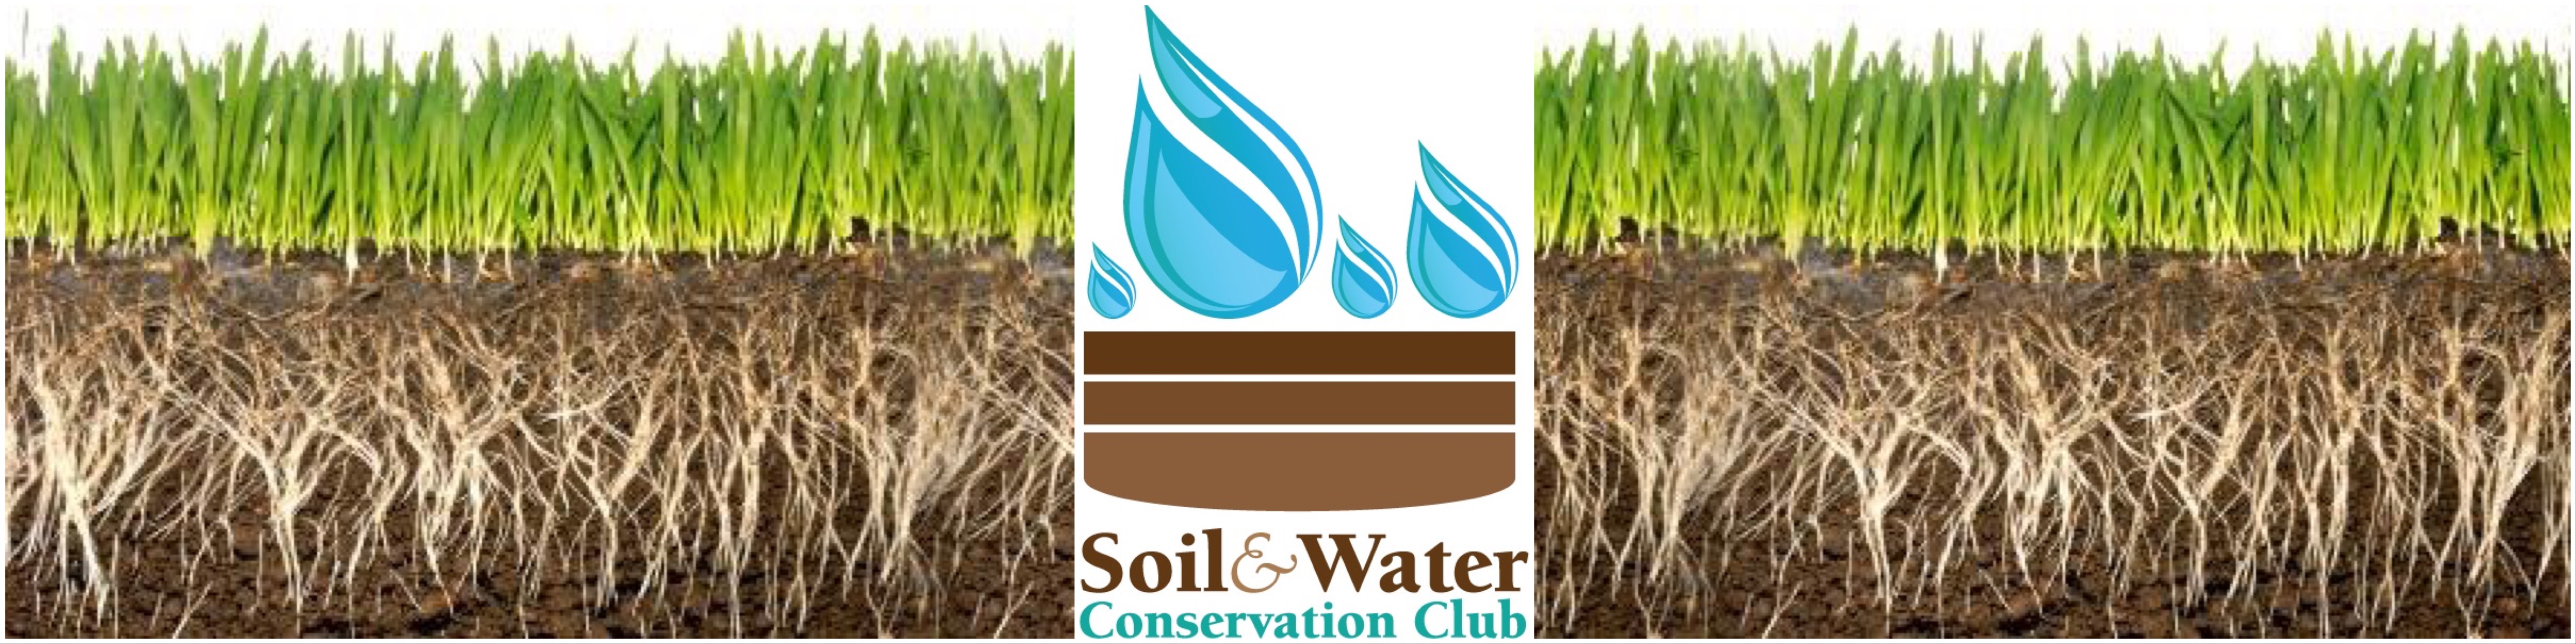 Soil And Water Conservation Club Header